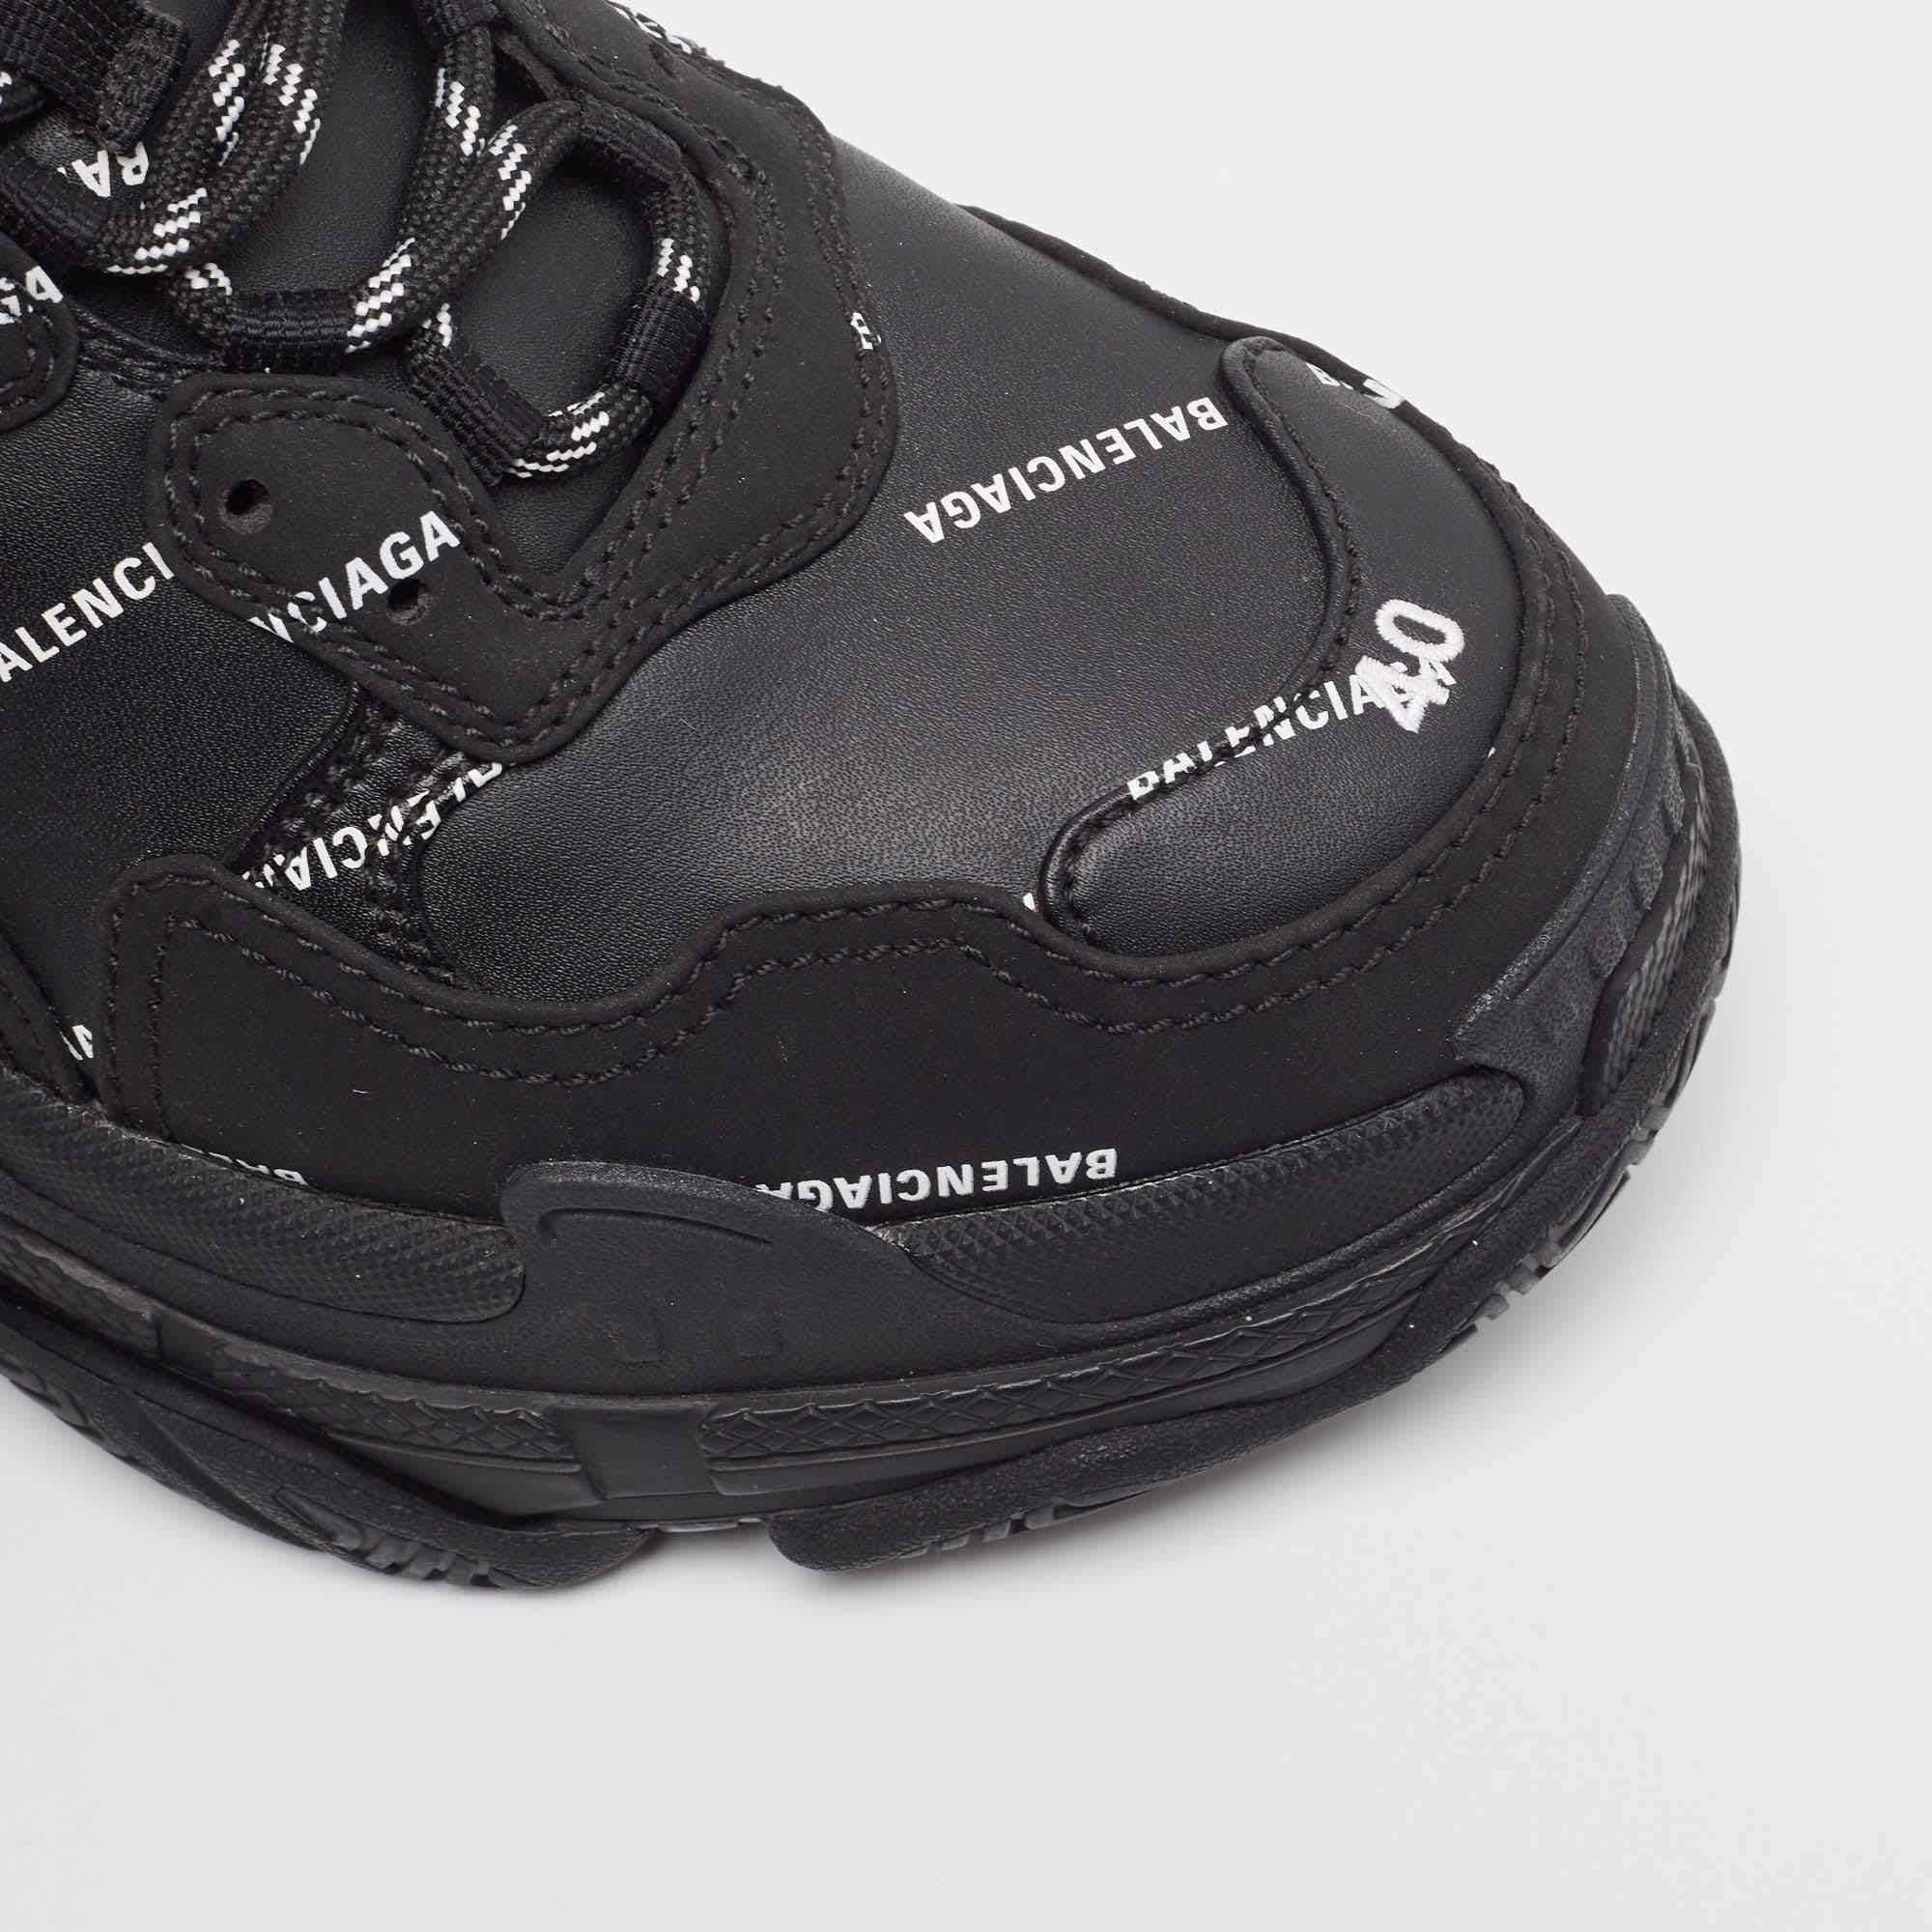 Balenciaga Black Leather and Nubuck Allover Logo Triple S Sneakers Size 40 For Sale 3